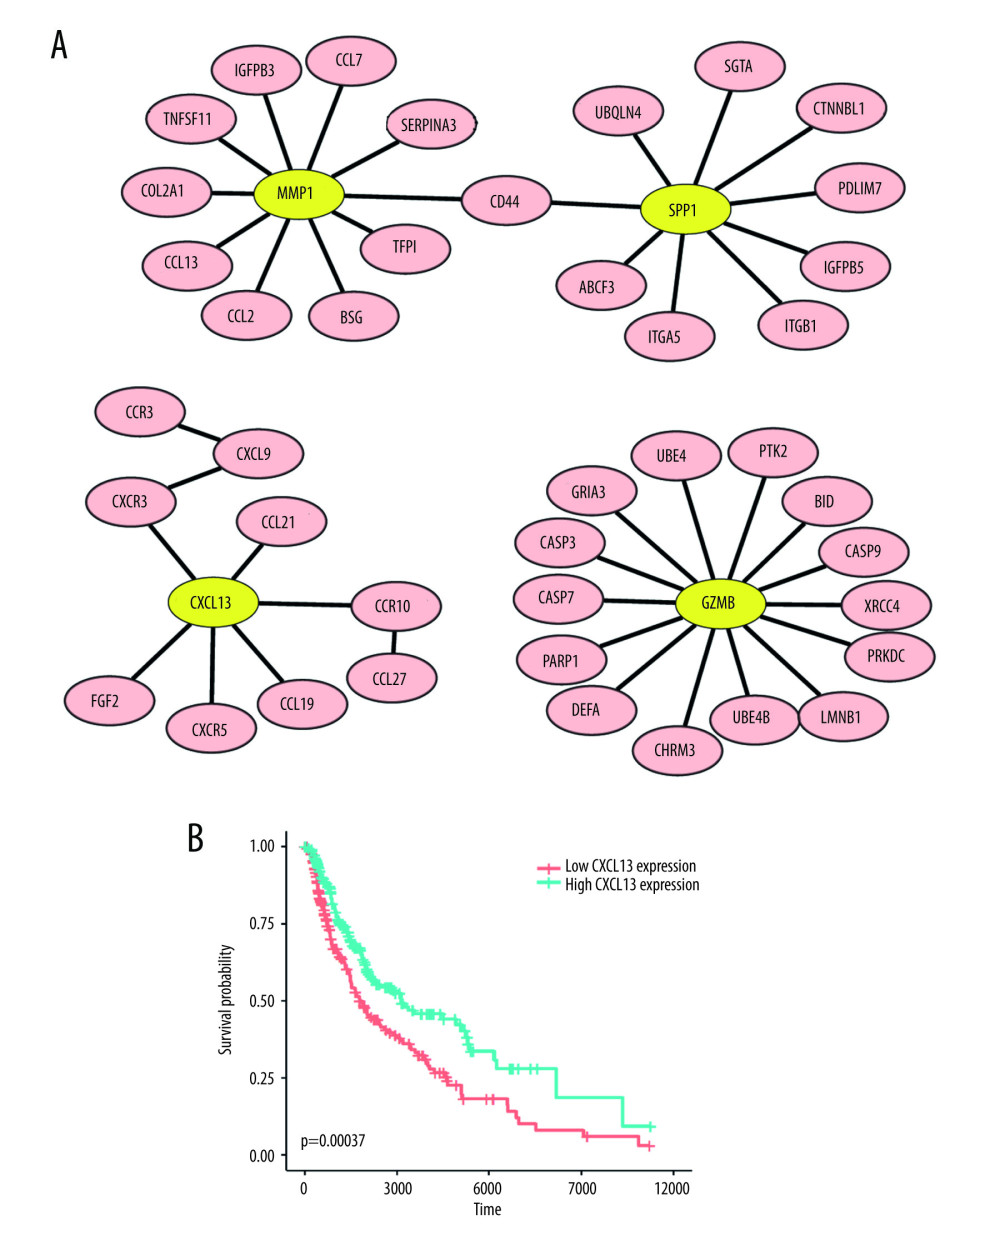 The network and survival plot. (A) The PPI (Protein-Protein Interaction) network of 4 high-degree DEGs (differentially-expressed genes). (B) Kaplan-Meier survival curves show that the expression of CXCL13 is consistently associated with better overall survival (OS) in SKCM. Figure 2A was produced using Cytoscape (version 3.8.2, https://cytoscape.org/). Figure 2B was produced using survival and survminer packages in R (version 3.6, https://www.r-project.org/).